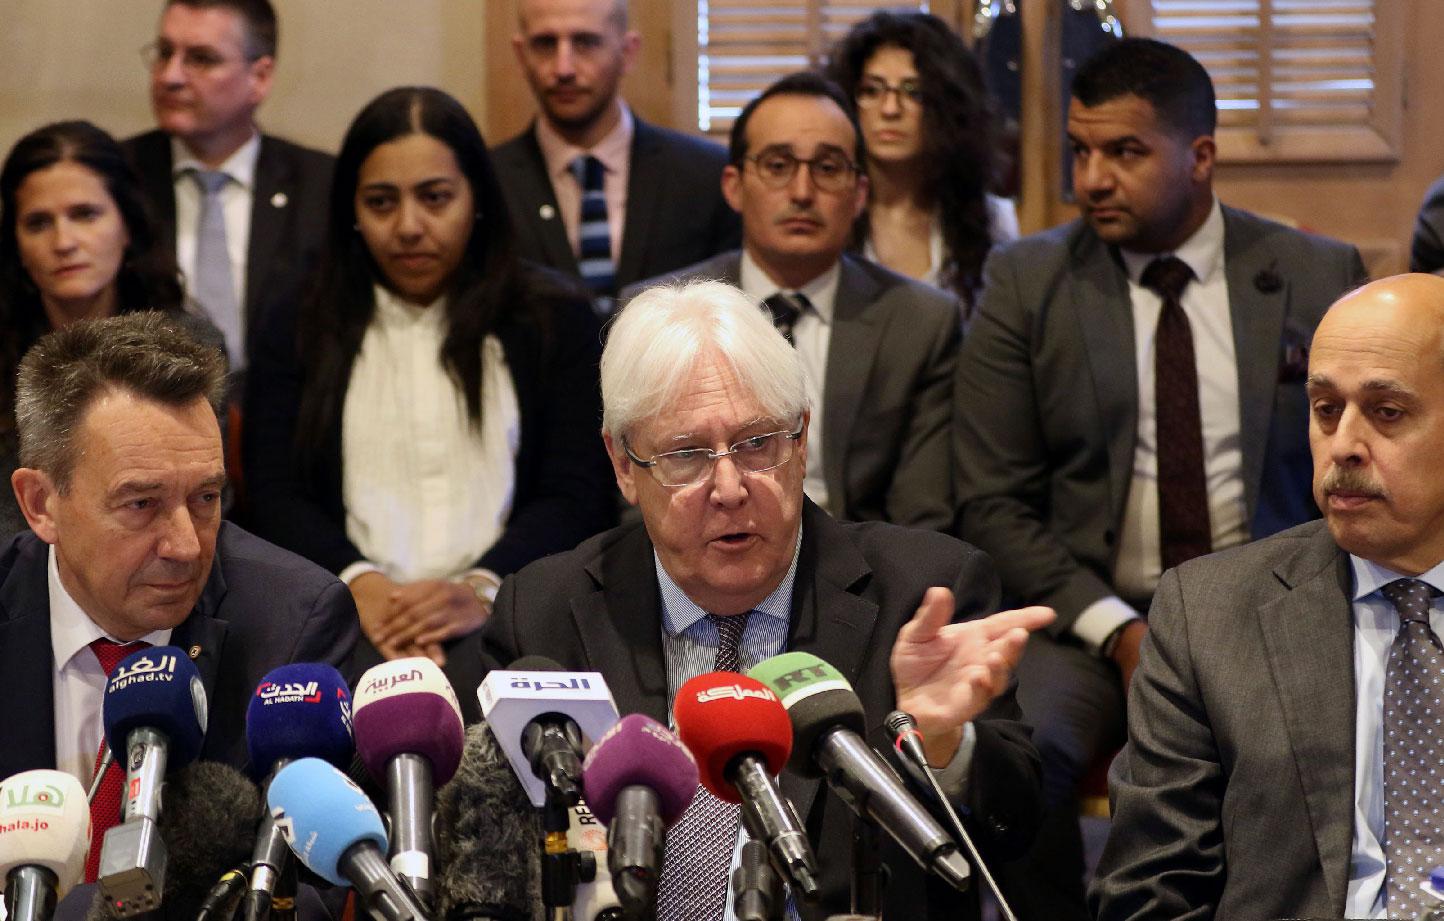 United Nations Special Envoy to Yemen Martin Griffiths (C) and International Committee of the Red Cross President Peter Maurer (L) attend a new round of talks by Yemen's warring parties on prisoners swap on February 5, 2019 in Amman.